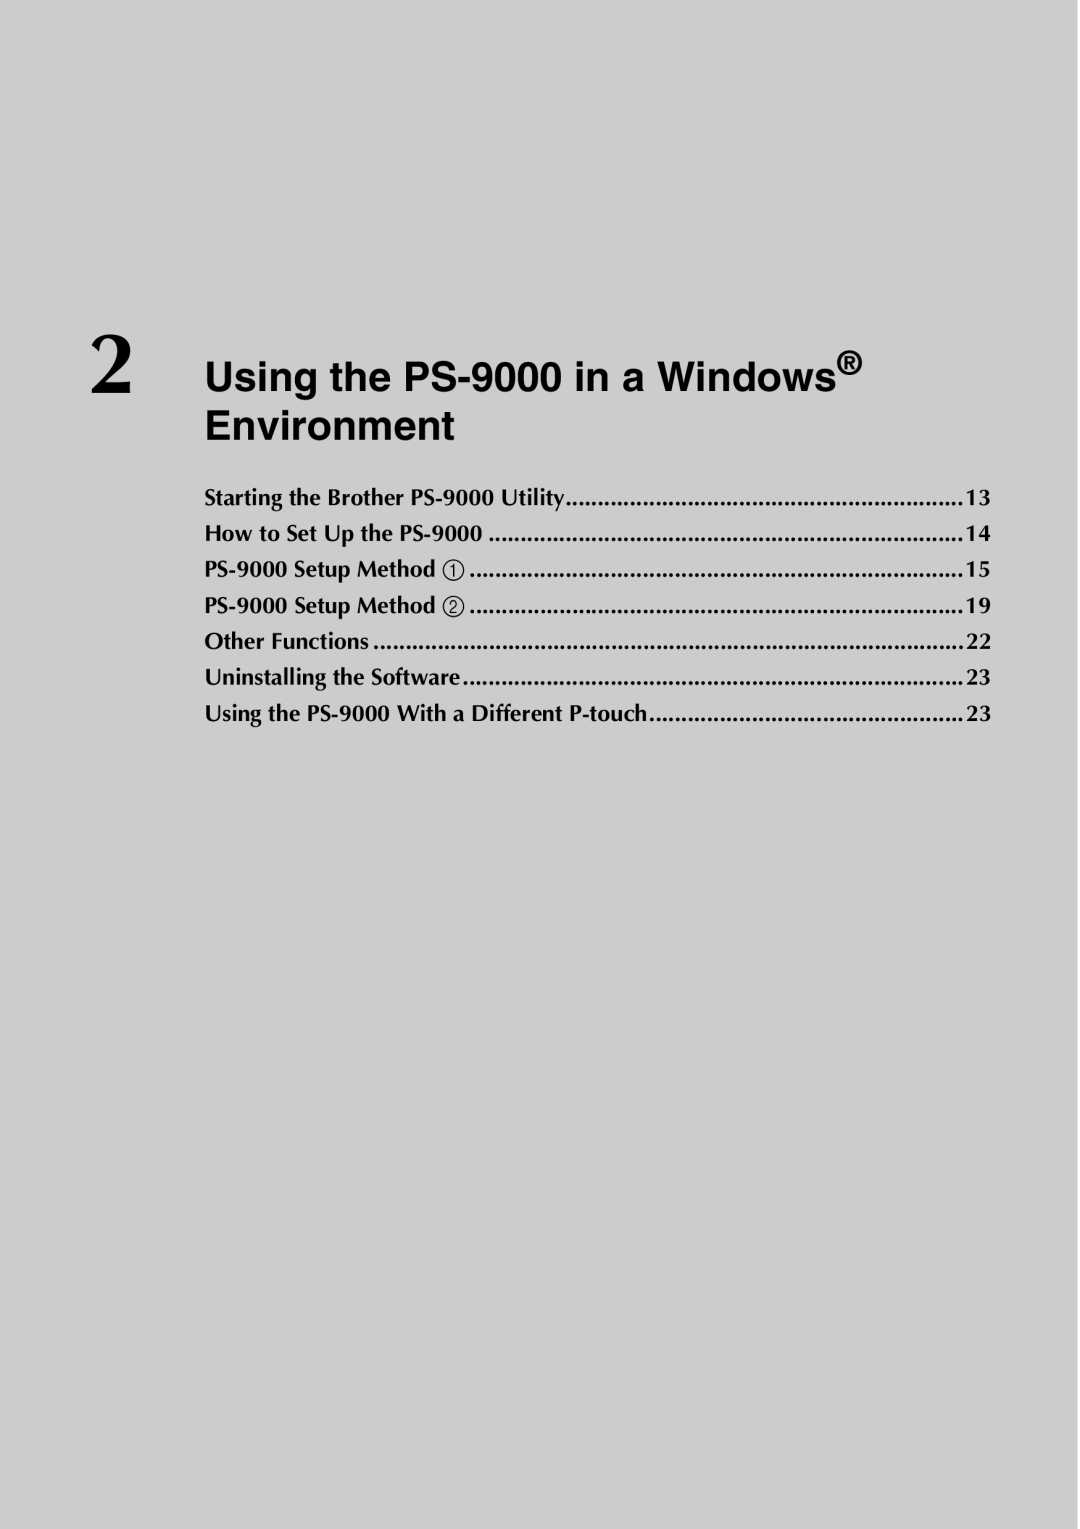 Brother Using the PS-9000 in a Windows, Environment, Starting the Brother PS-9000 Utility, How to Set Up the PS-9000 